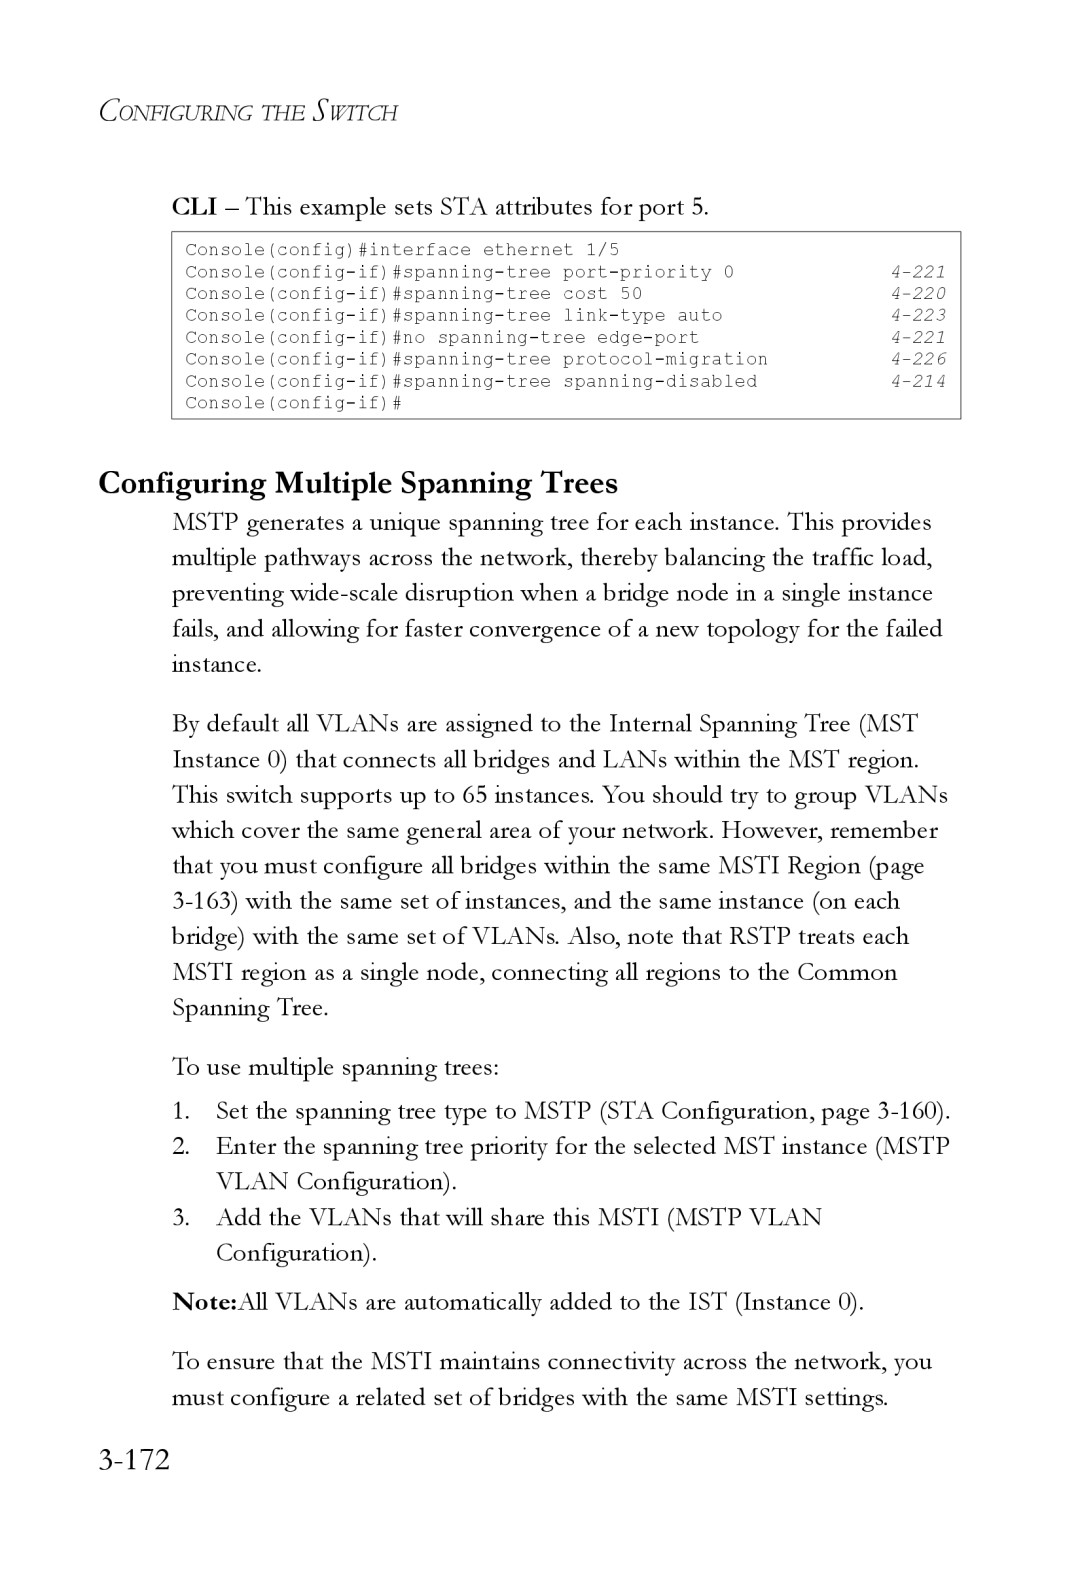 SMC Networks SMC6824M manual Configuring Multiple Spanning Trees, 172, CLI This example sets STA attributes for port 